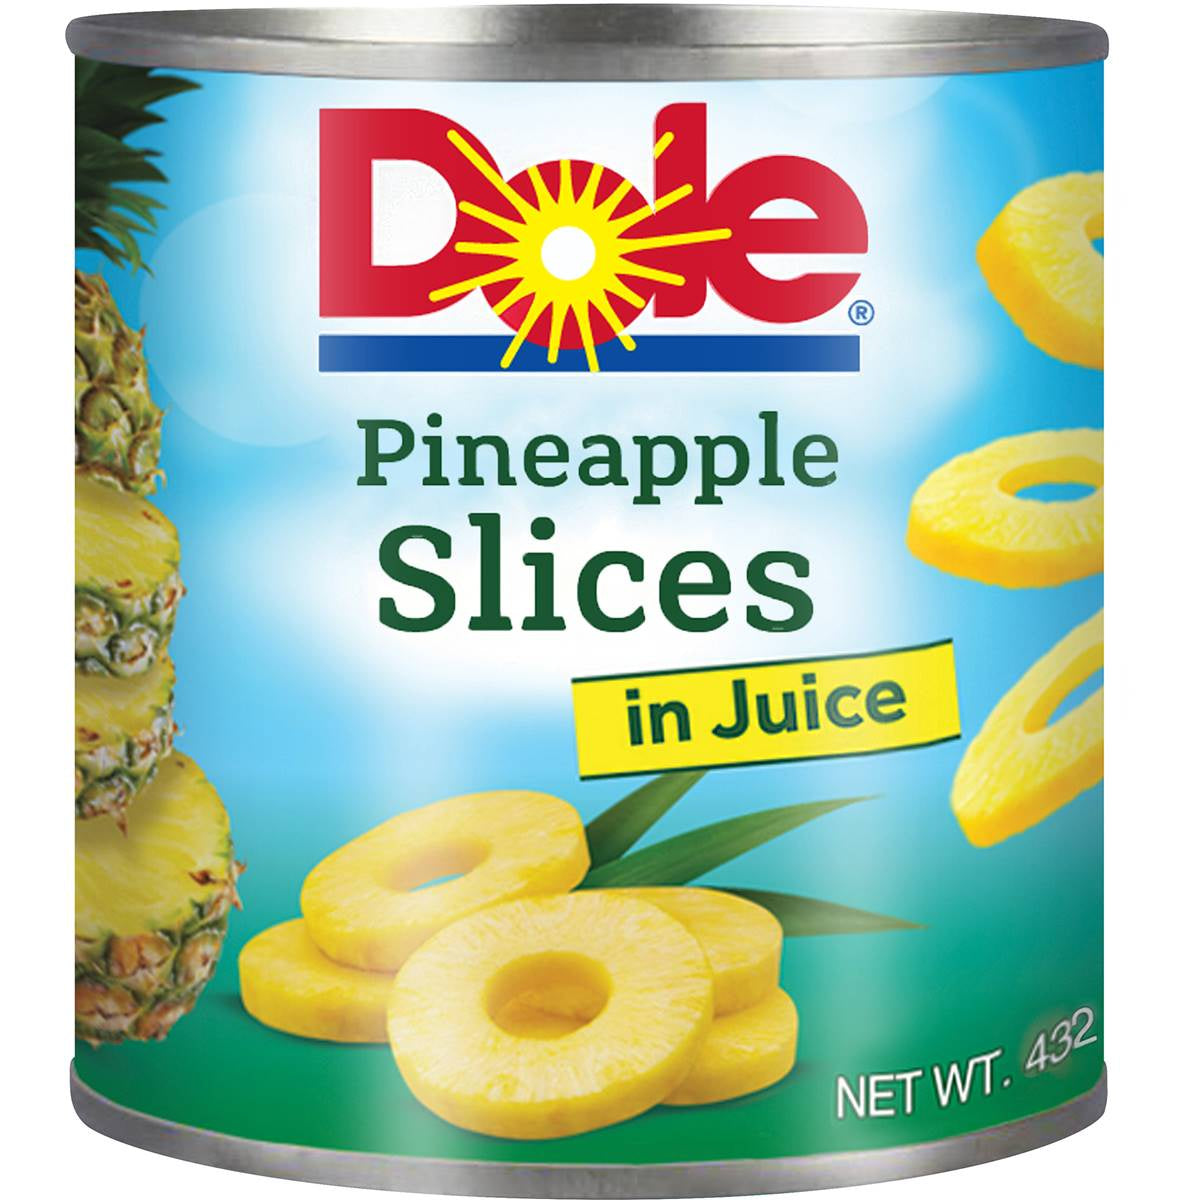 Dole Pineapple Slices In Juice 432G